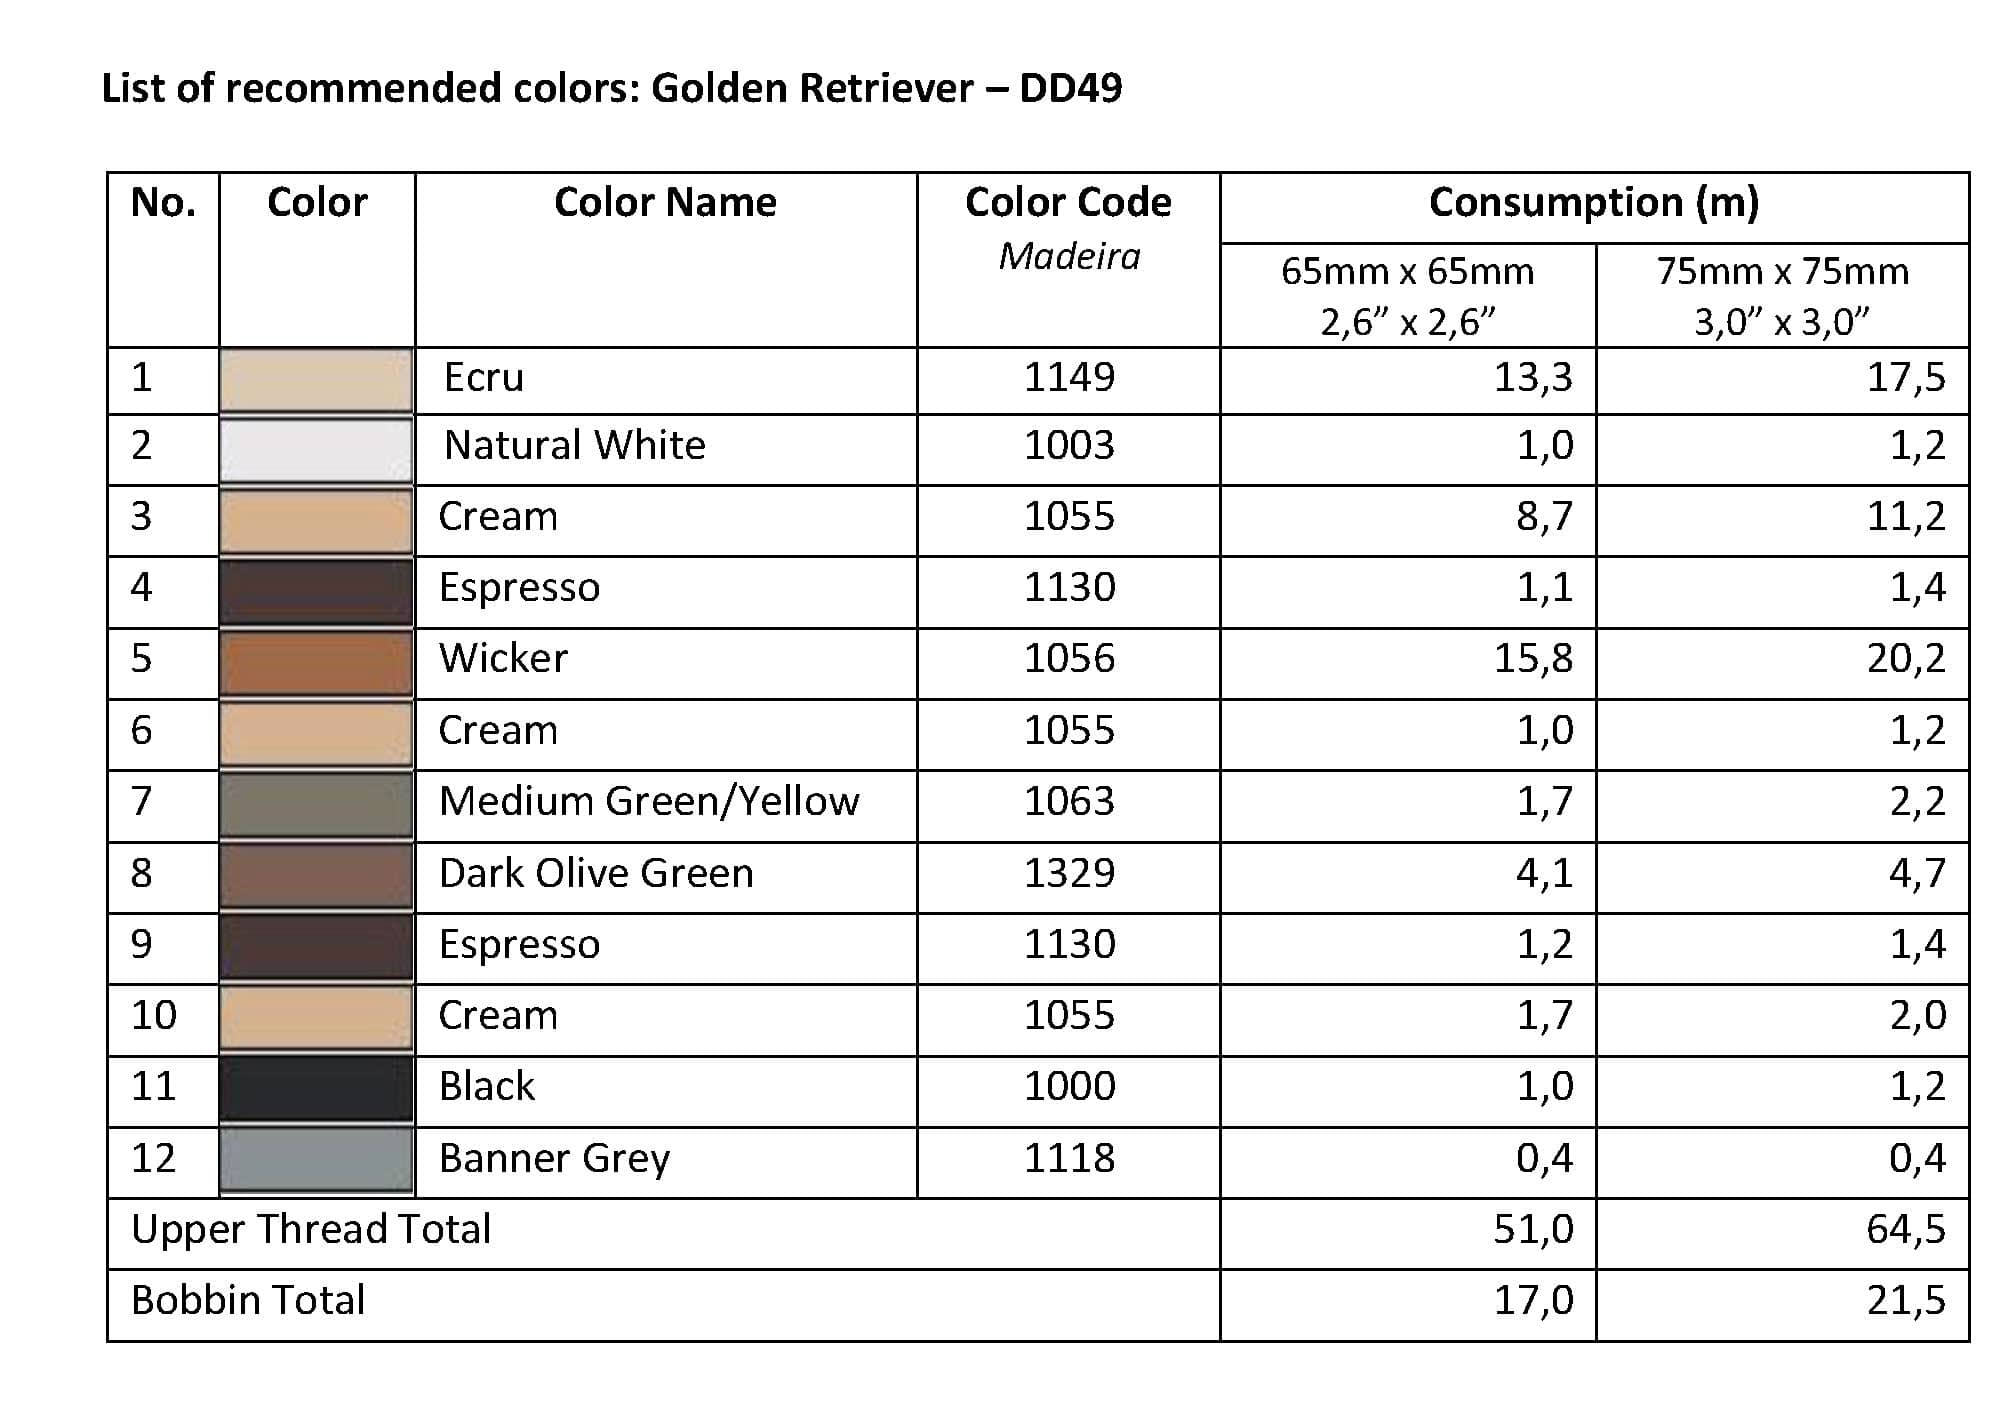 List of Recommended Colors - Golden Retriever DD49